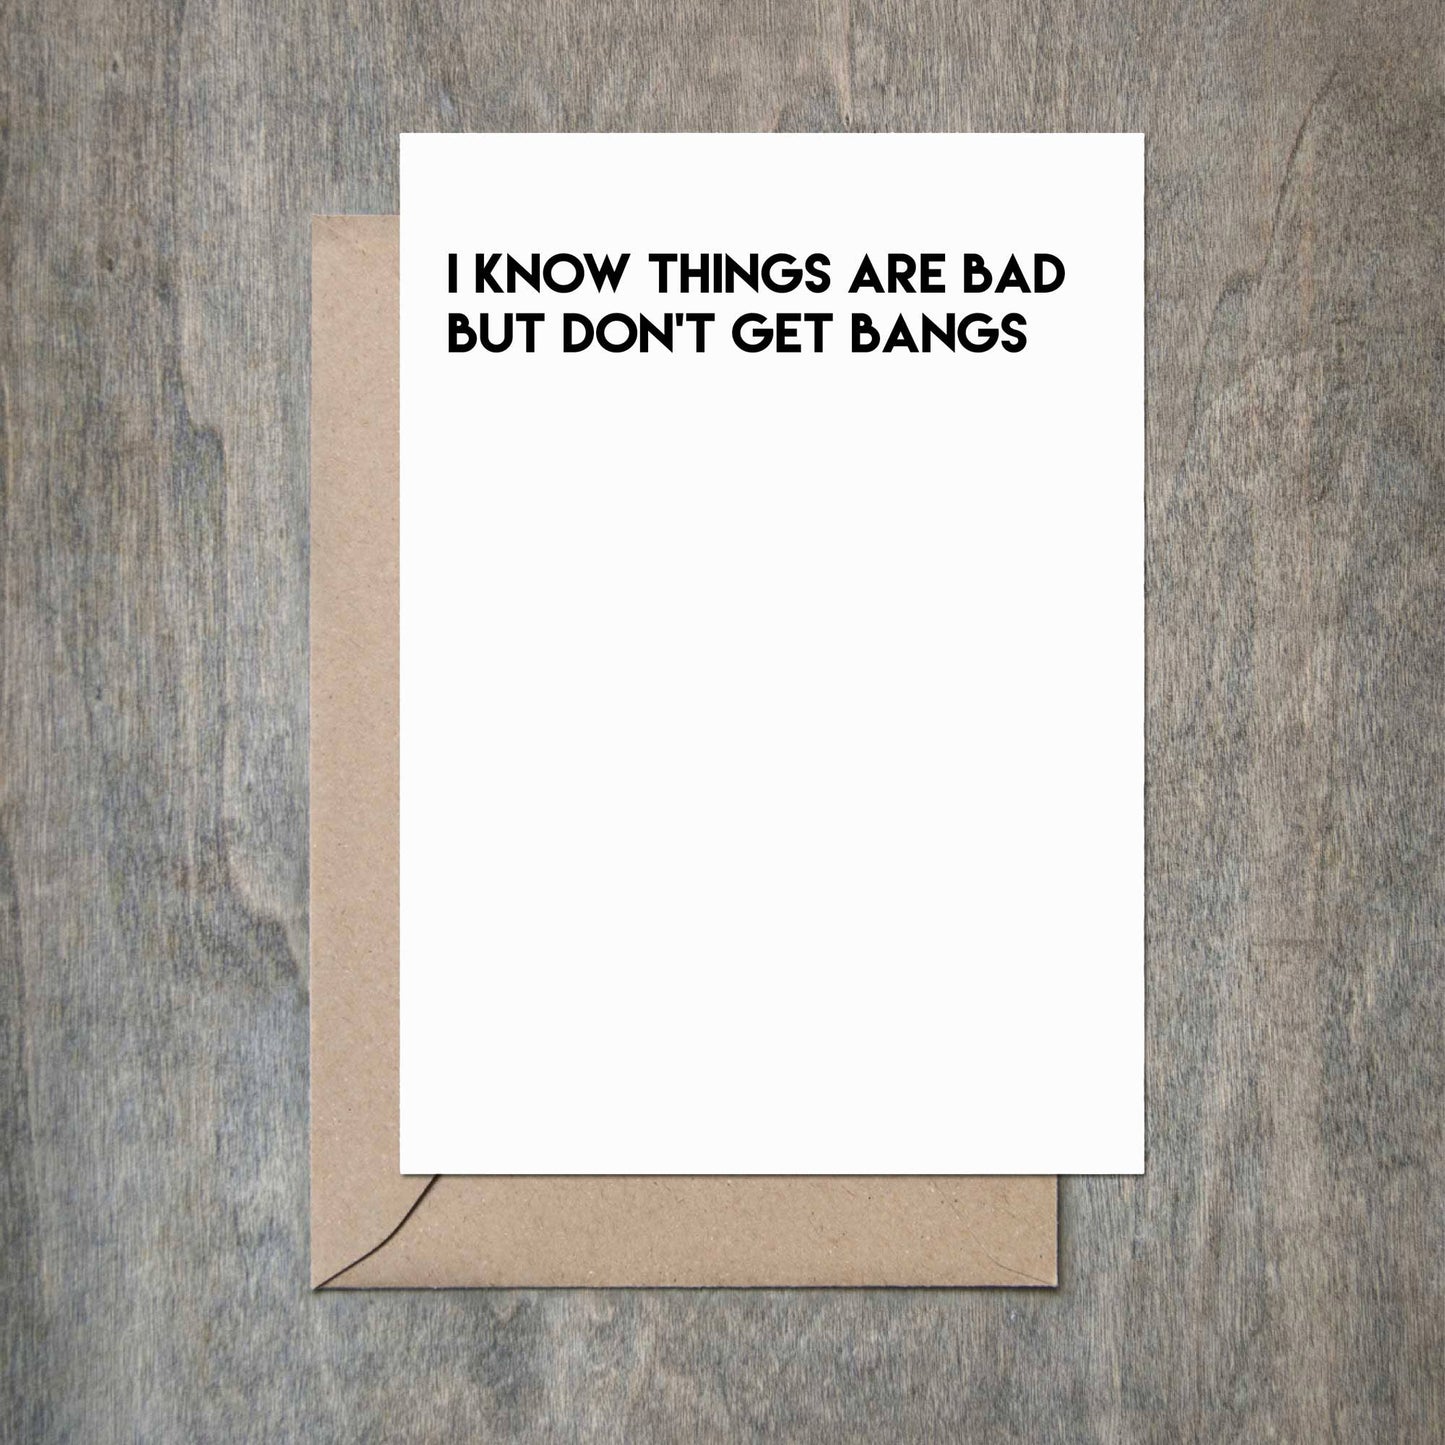 Crimson and Clover Studio - Don't Get Bangs Card